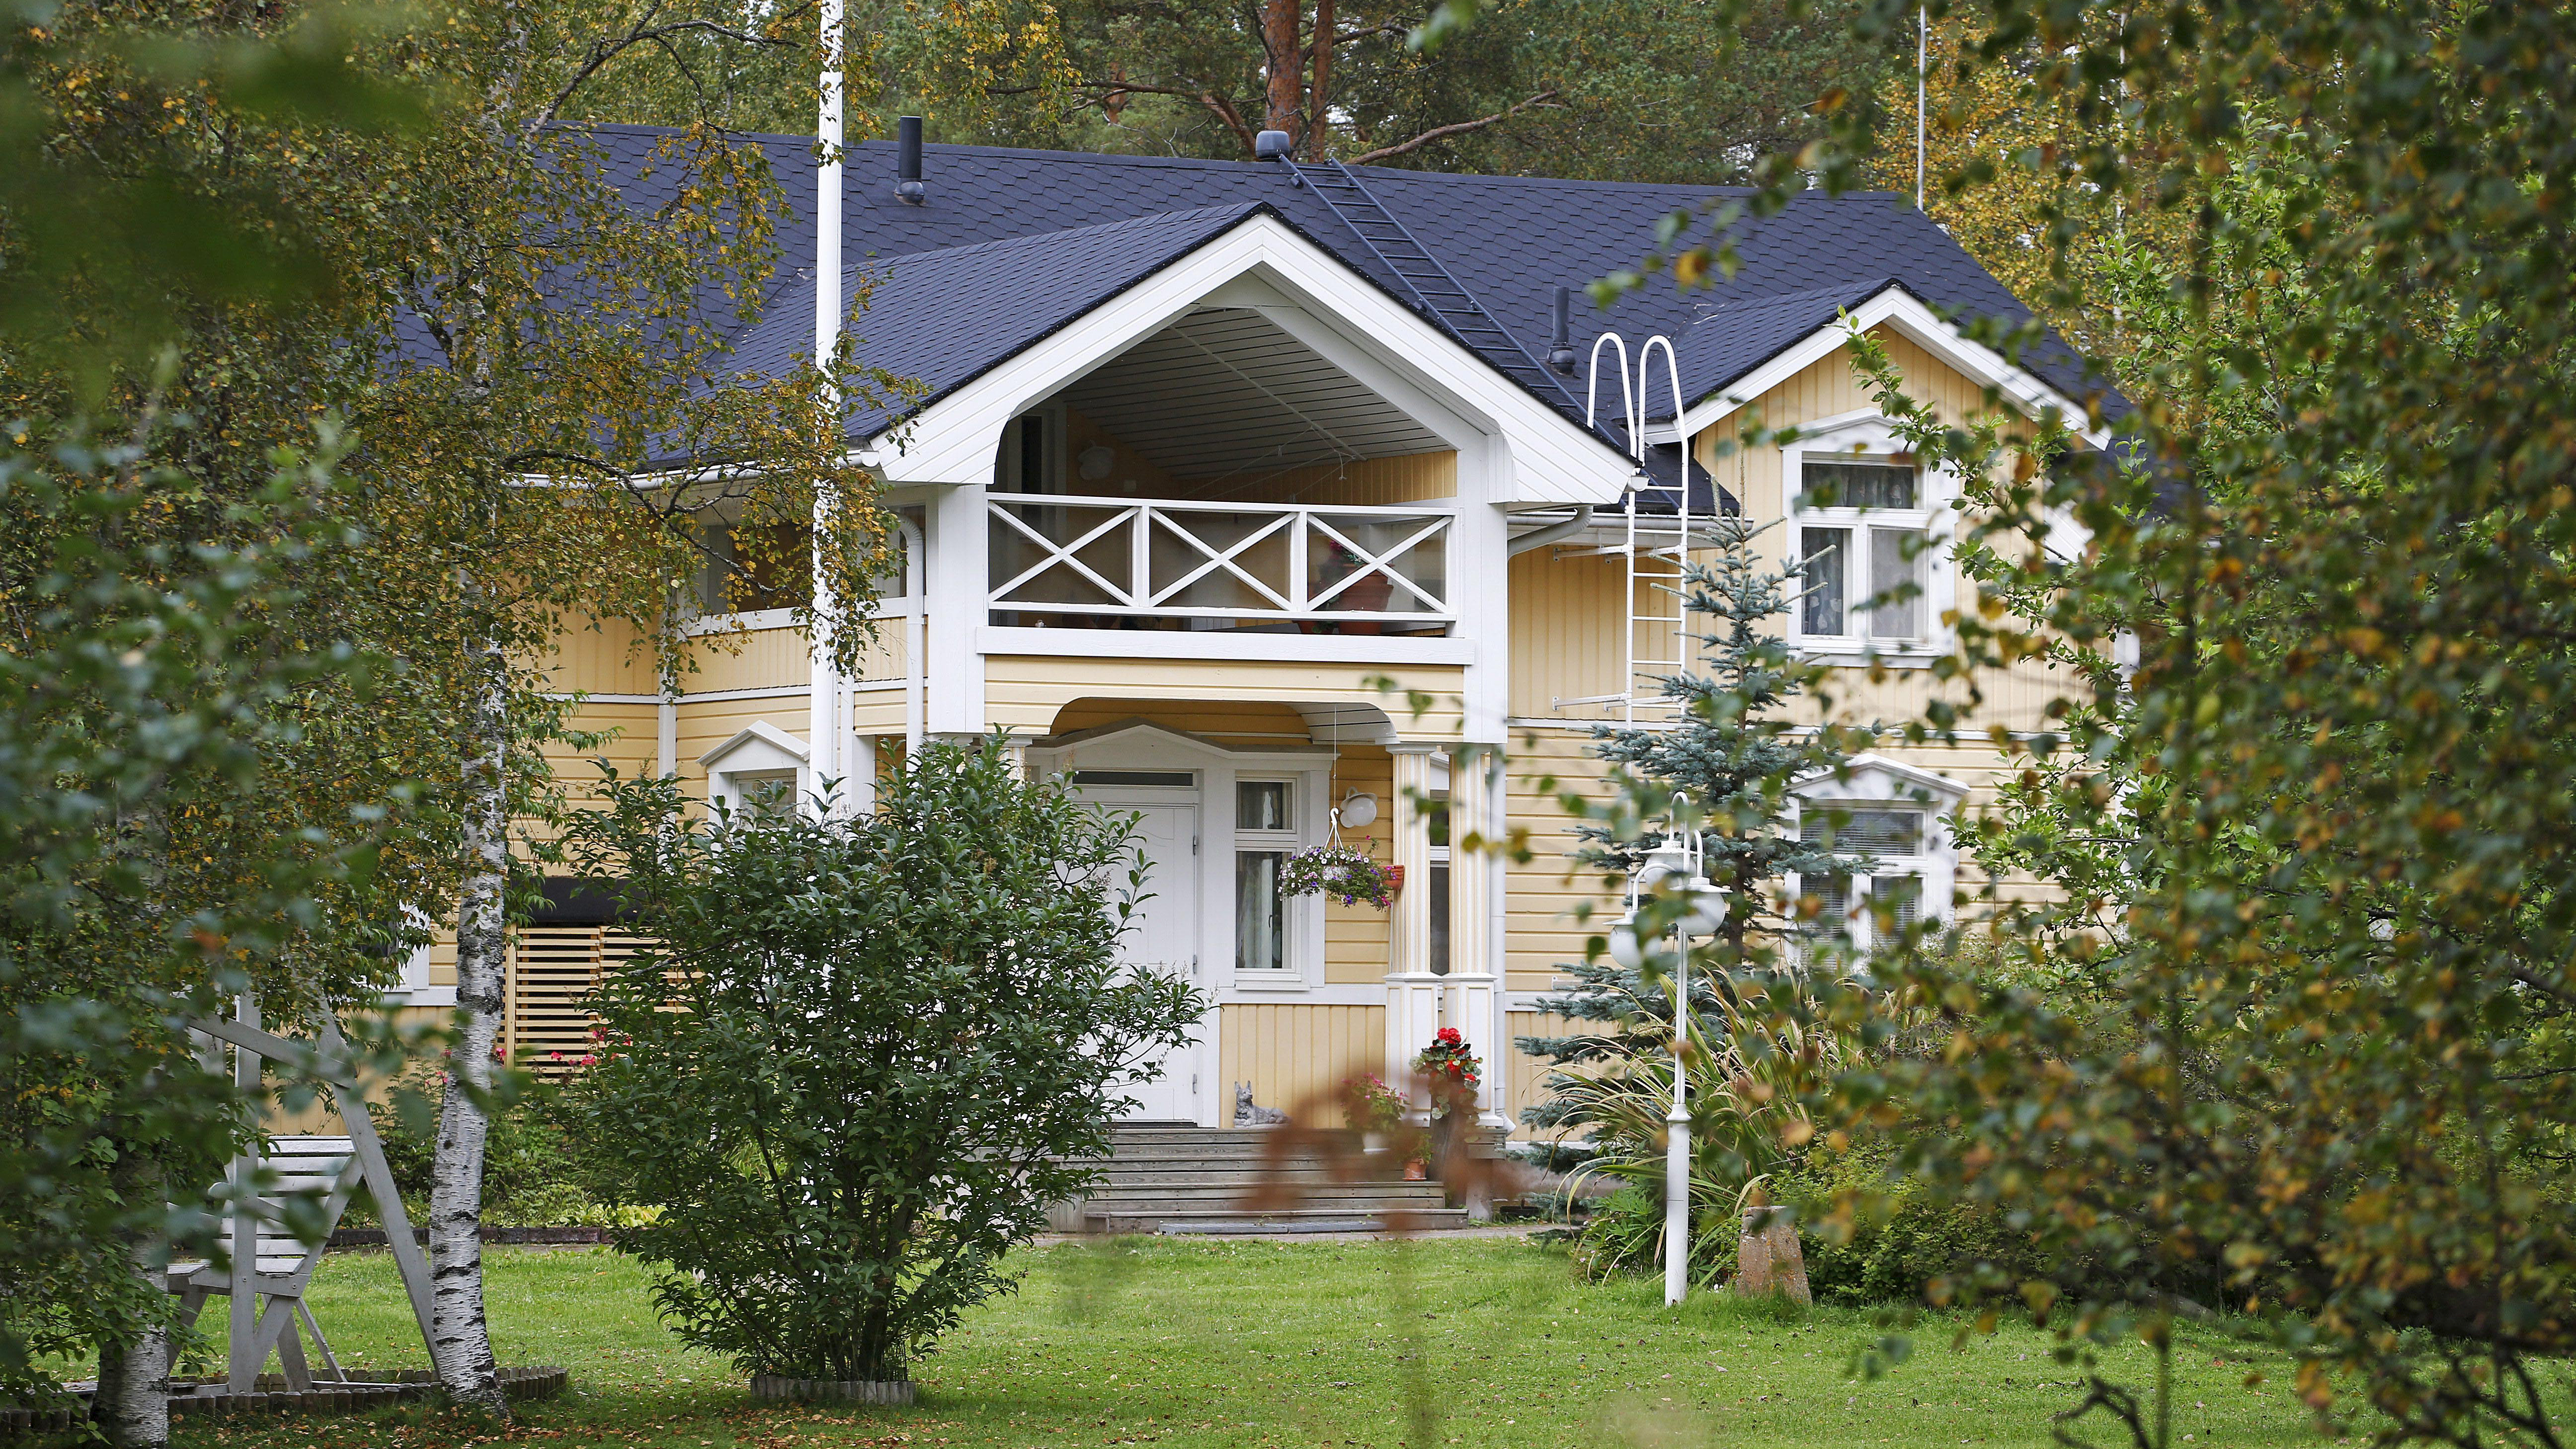 Finland's Prime Minister Juha Sipila's house in Kempele, Finland